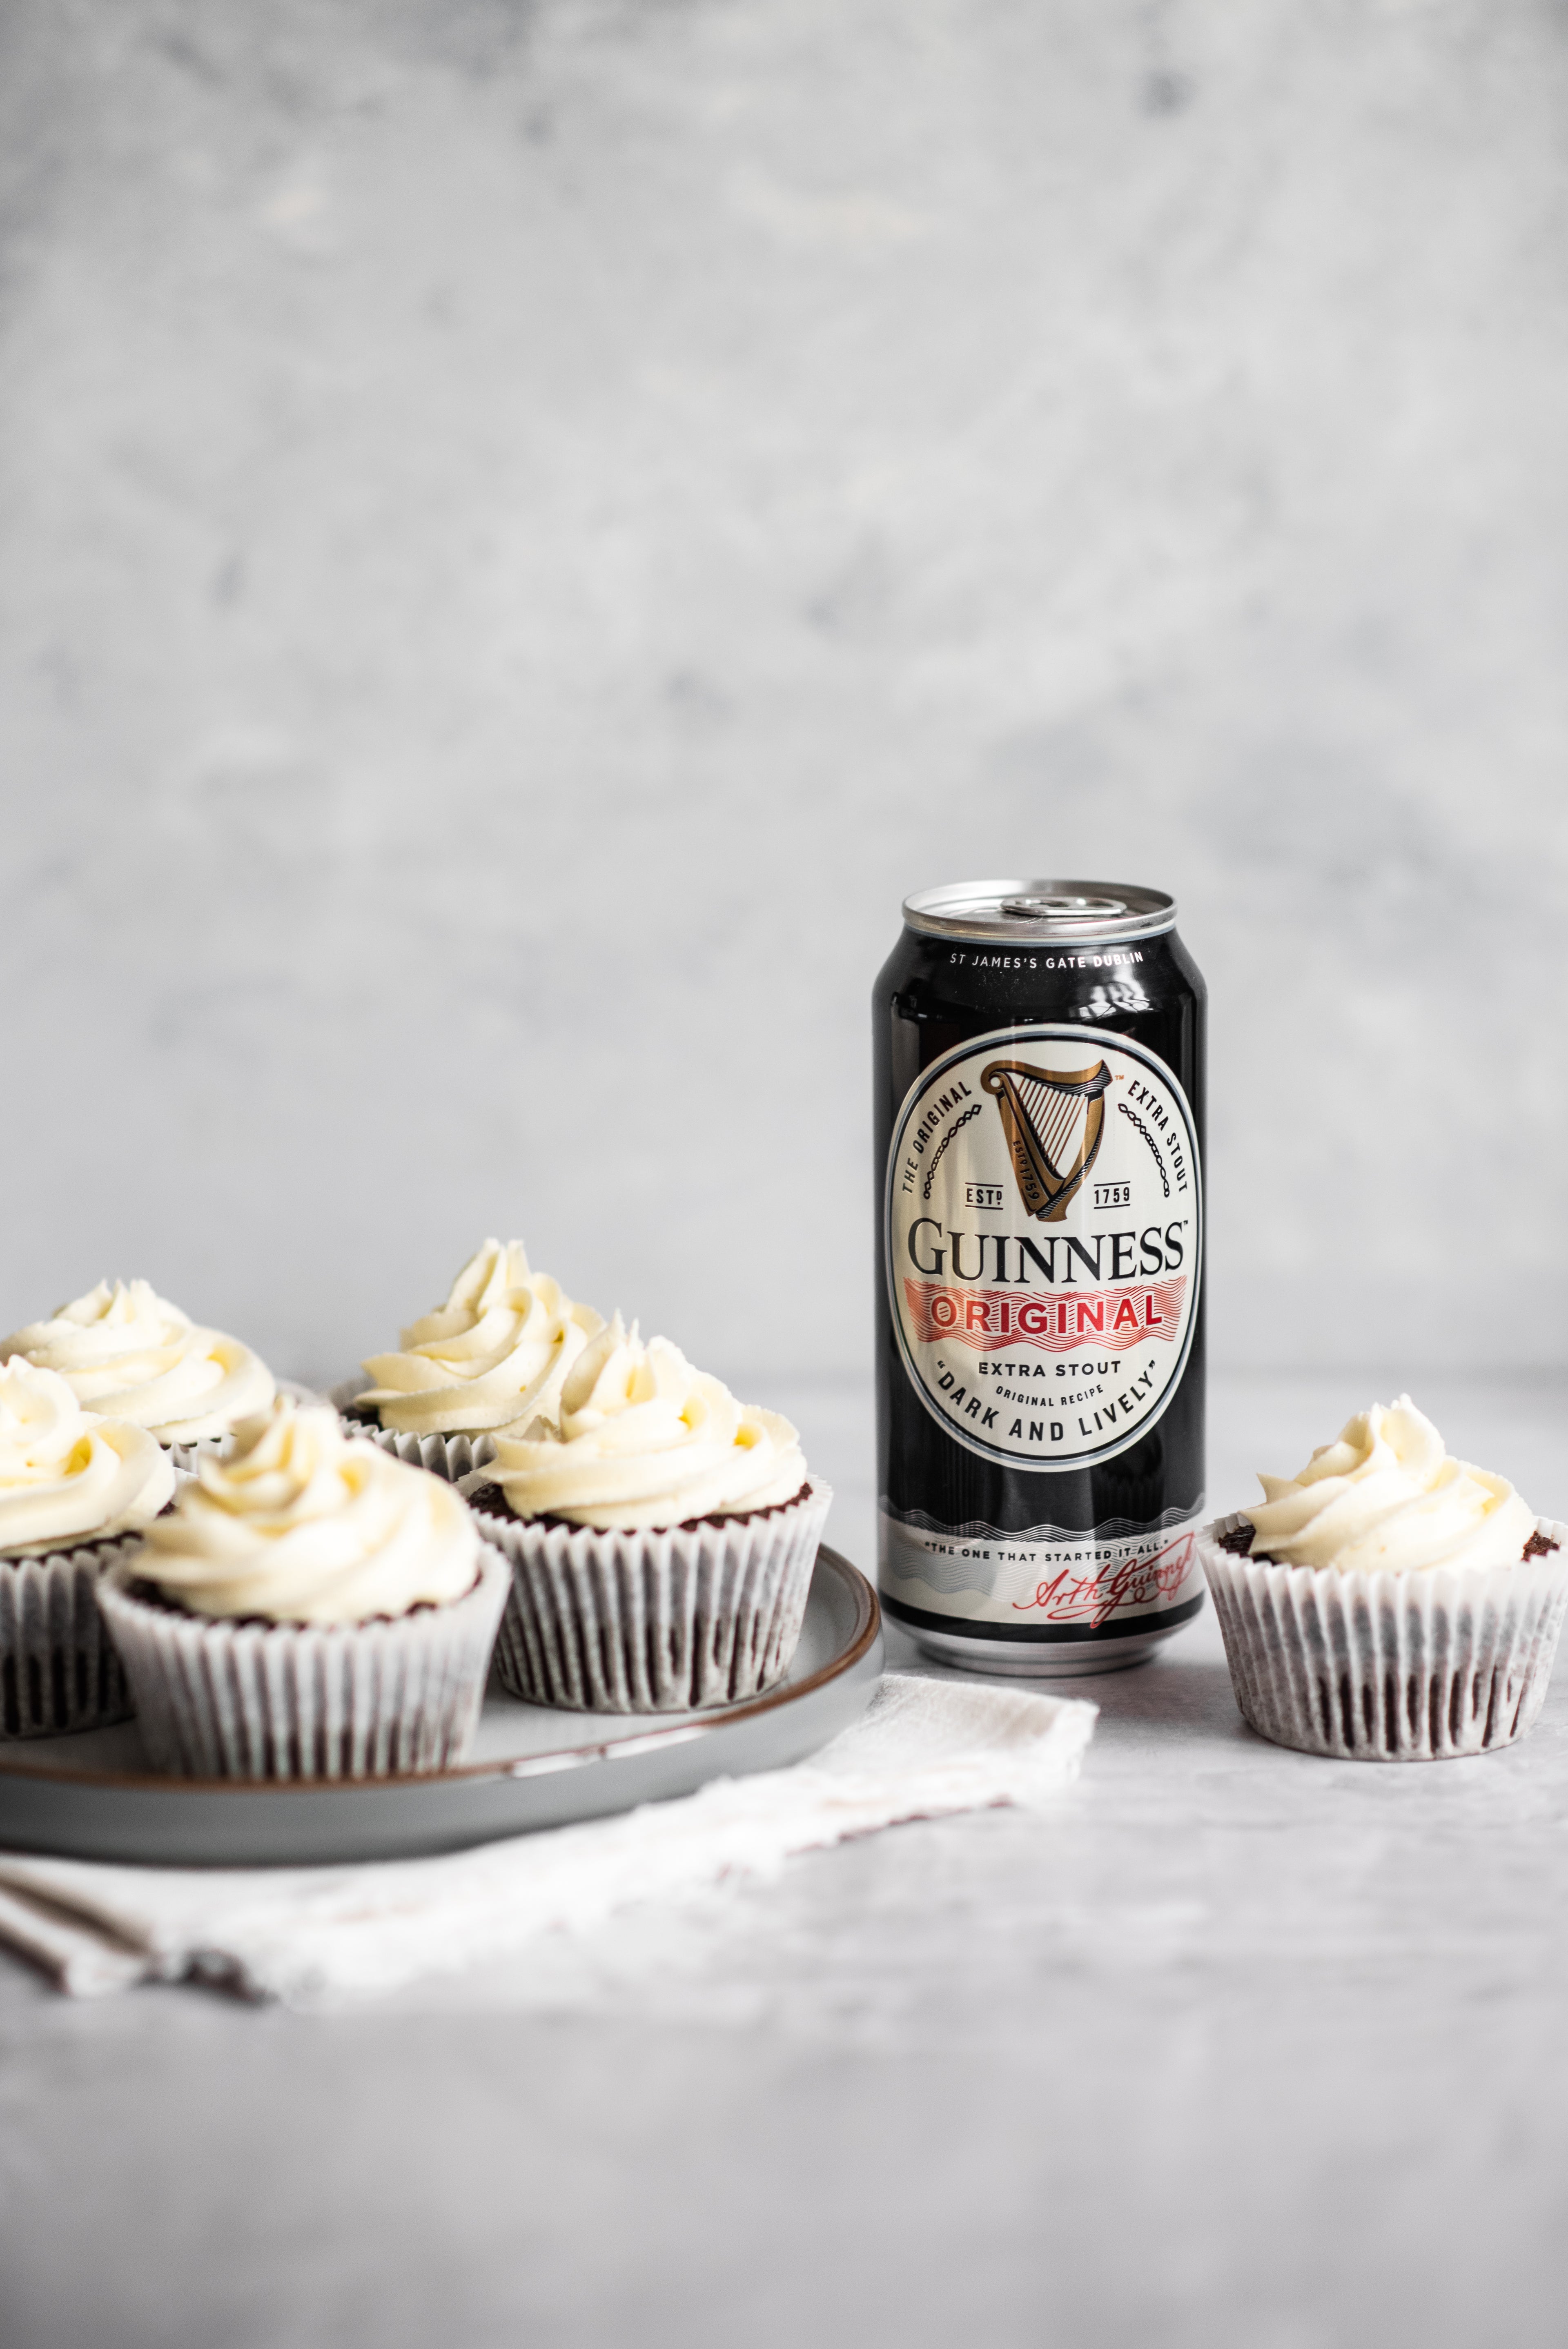 Cupcakes with a can of Guinness next to them